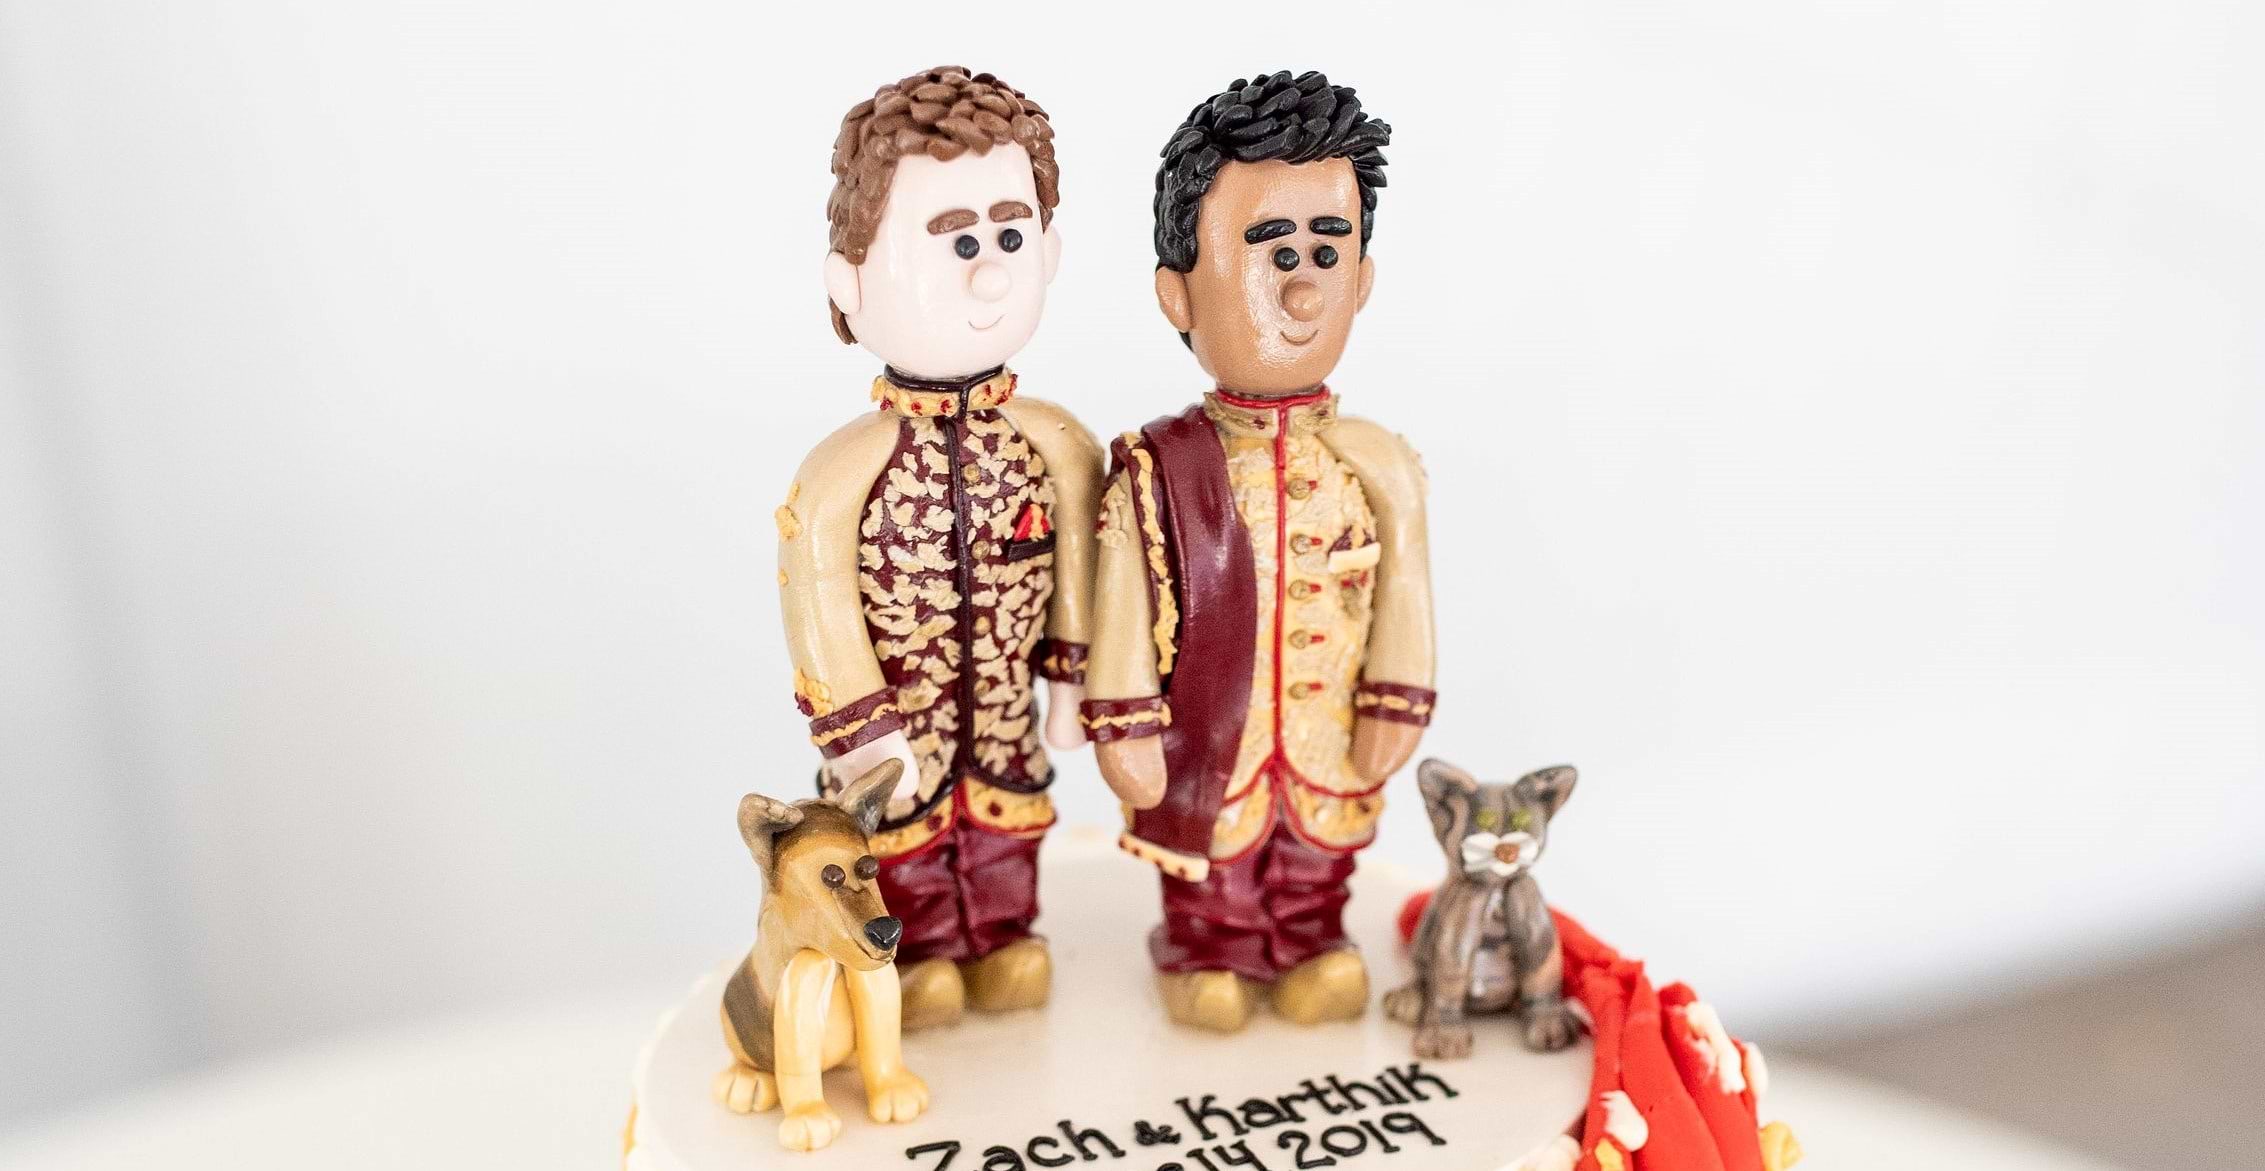 Creative Cake Toppers add a personal touch in a cute and subtle way